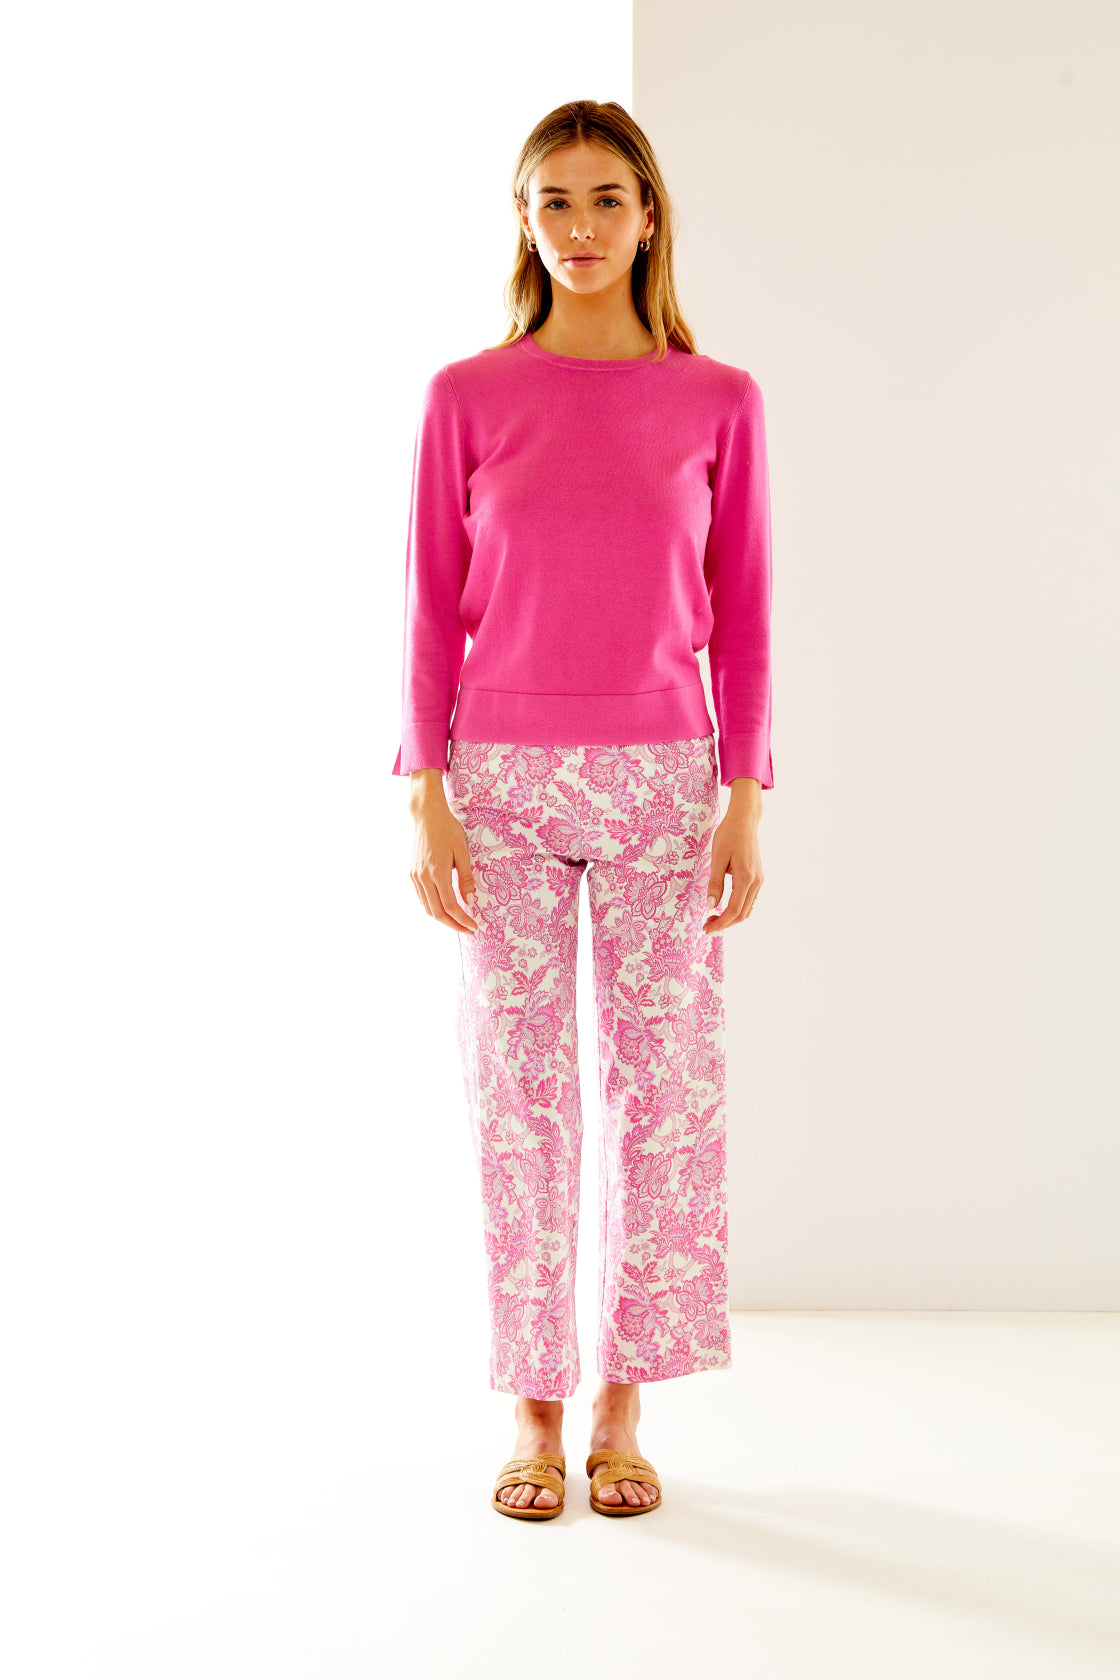 Woman in pink and white printed pant